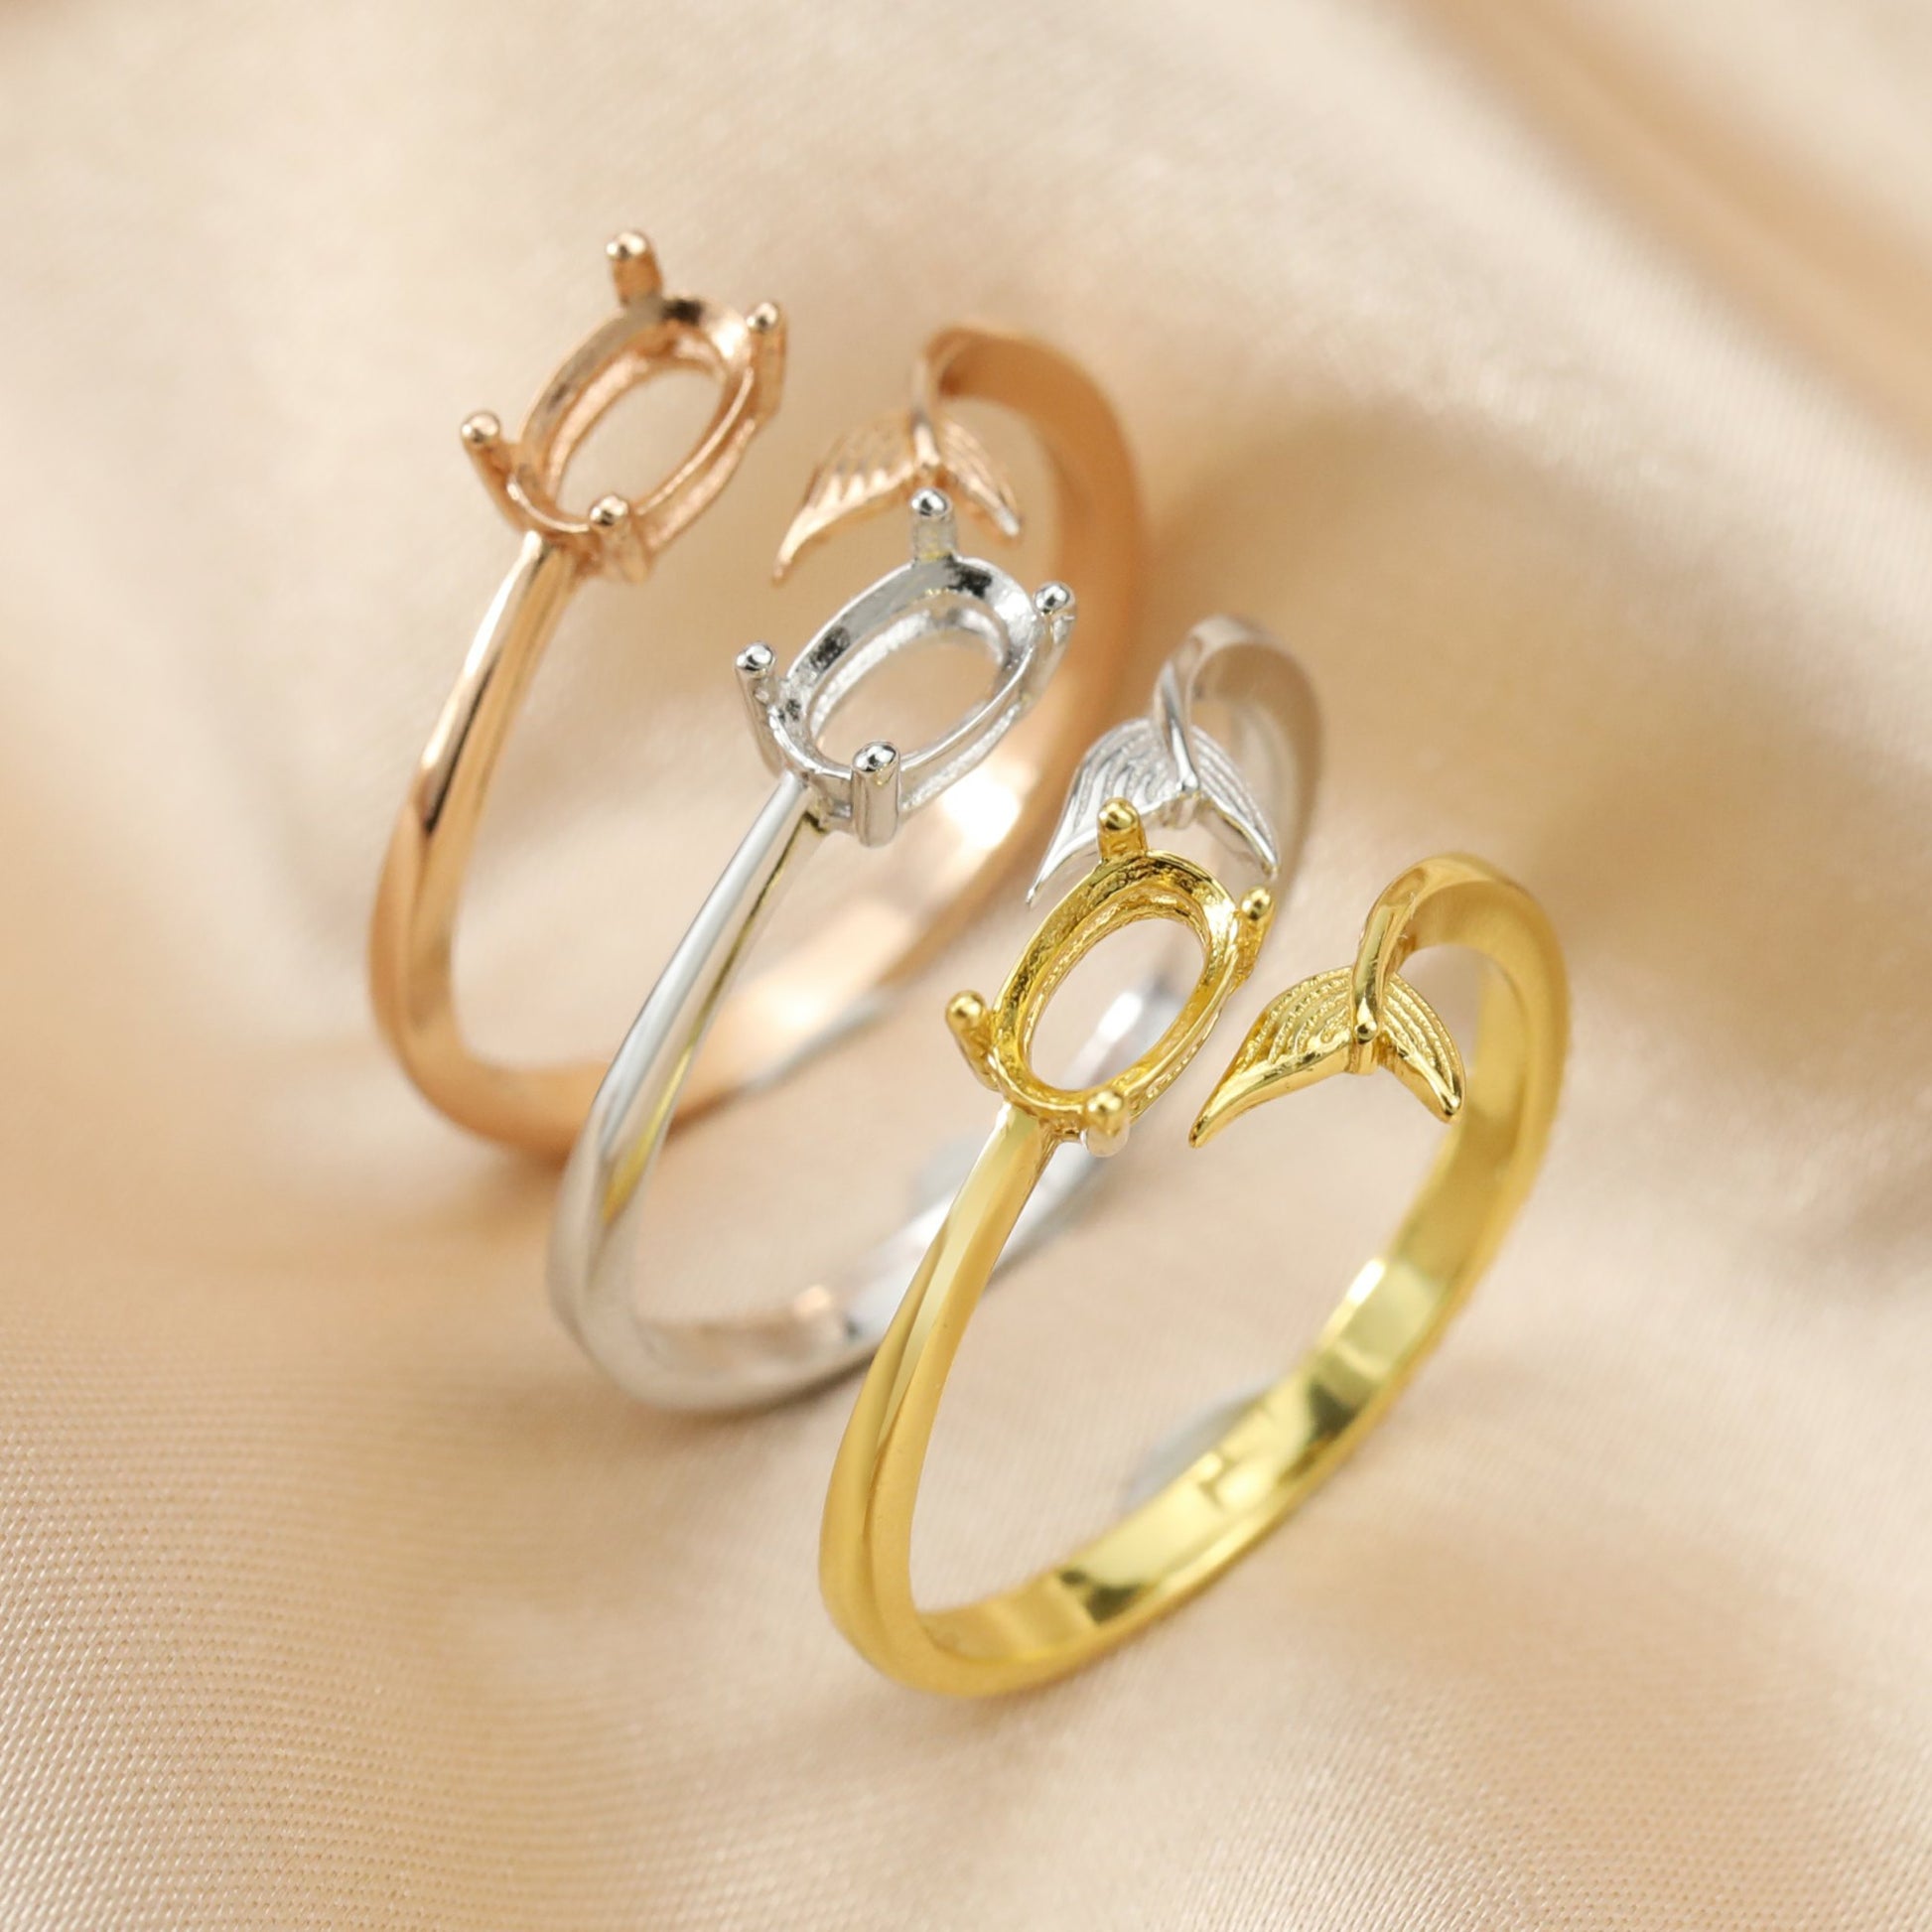 One silver, one gold and one rose gold oval wrap around rings with a mermaid tail on the opposite ends.